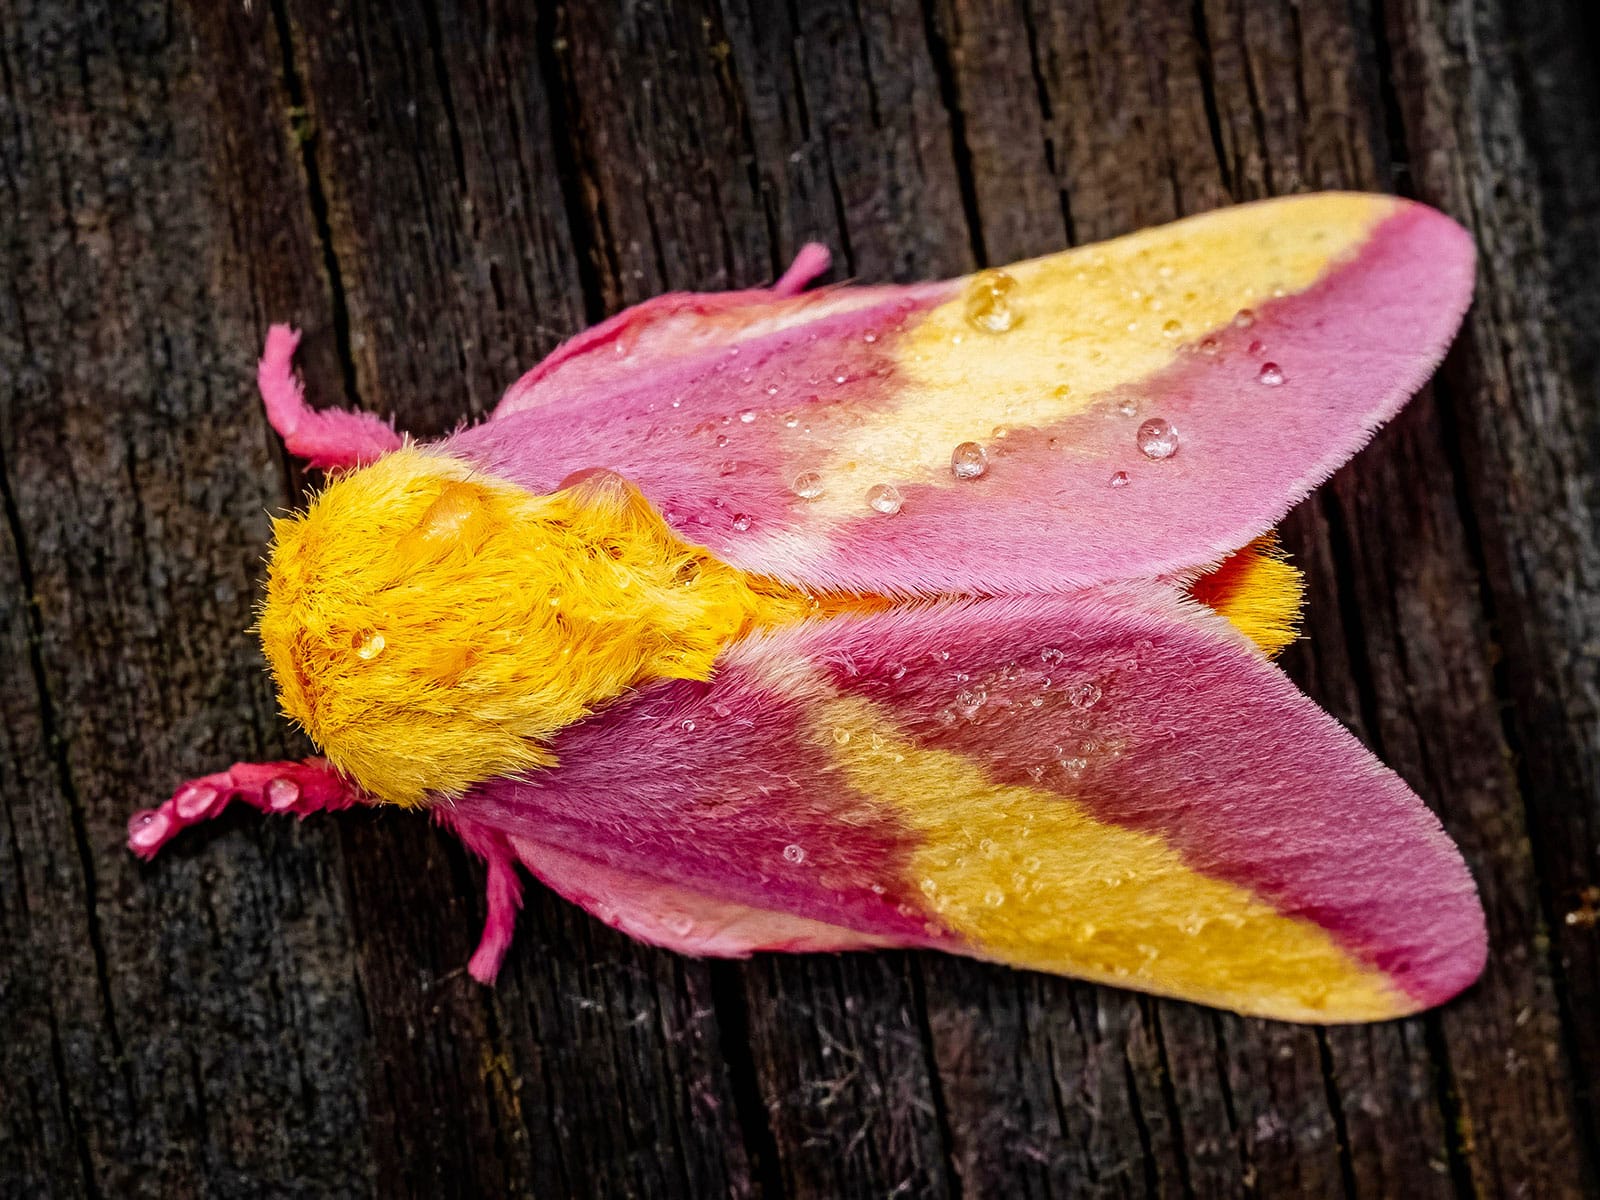 Rosy maple moth resting on the side of a tree trunk